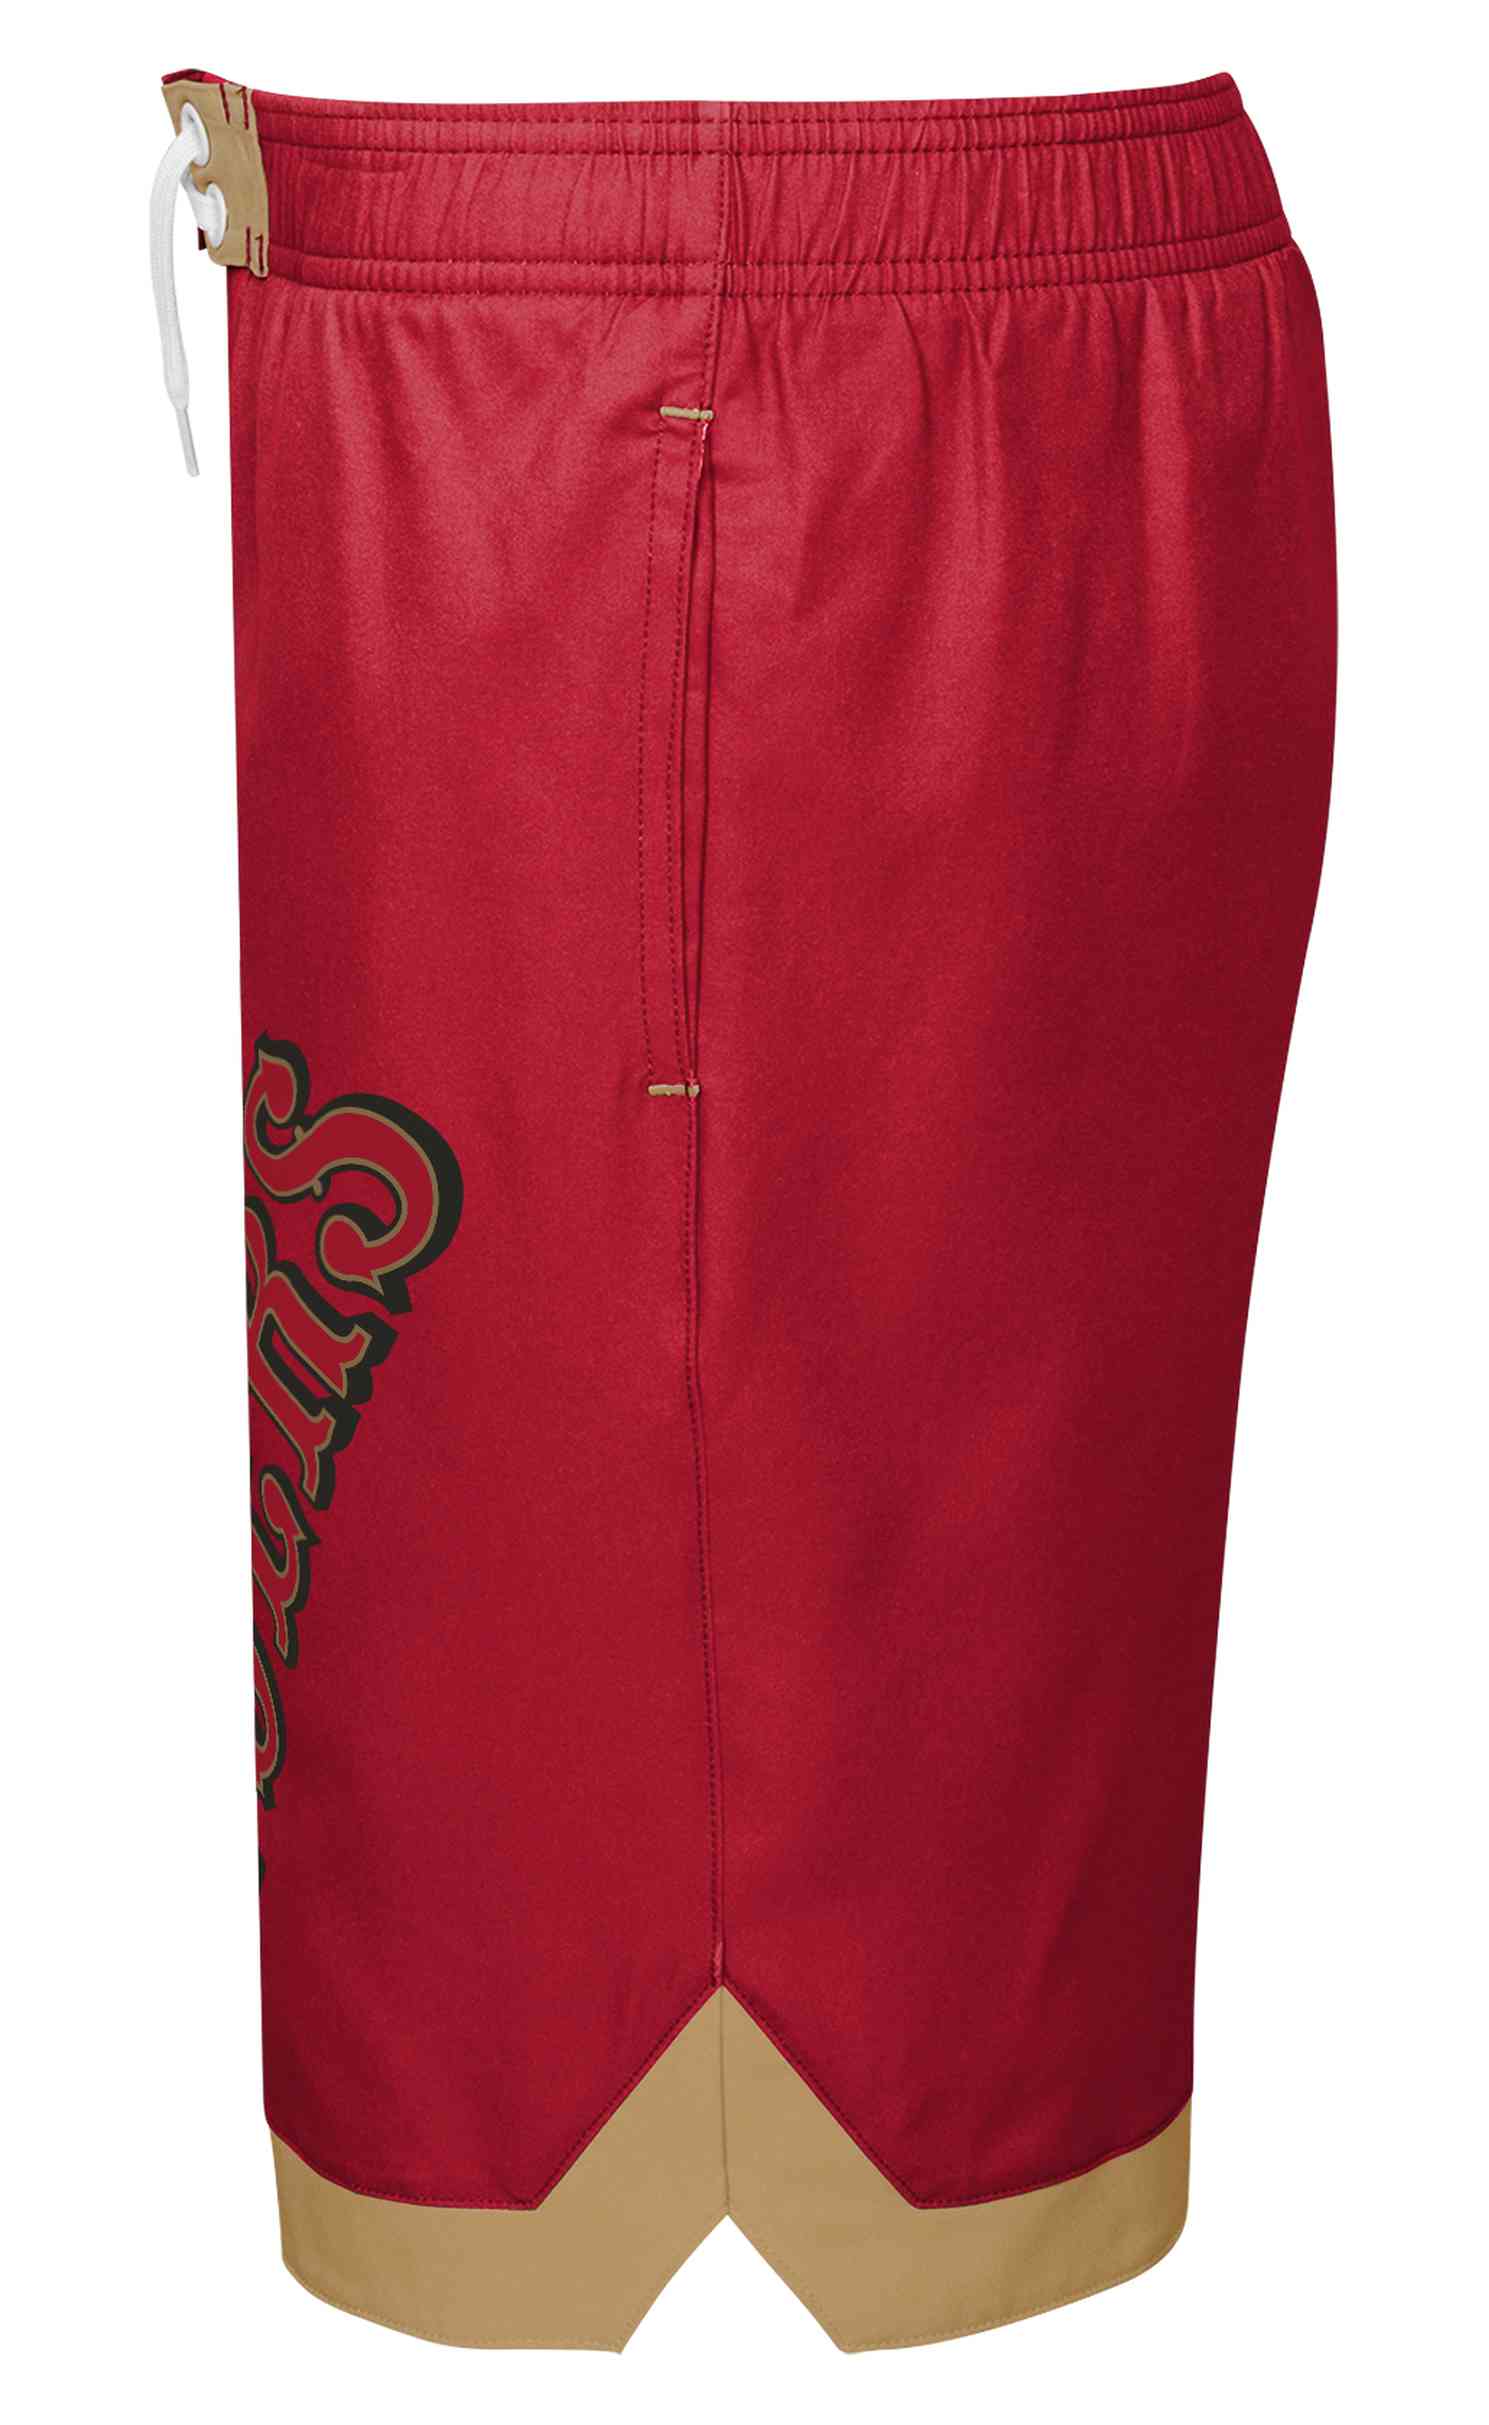 Mitchell & Ness - NFL San Francisco 49ers Conch Bay Kinder Board Shorts